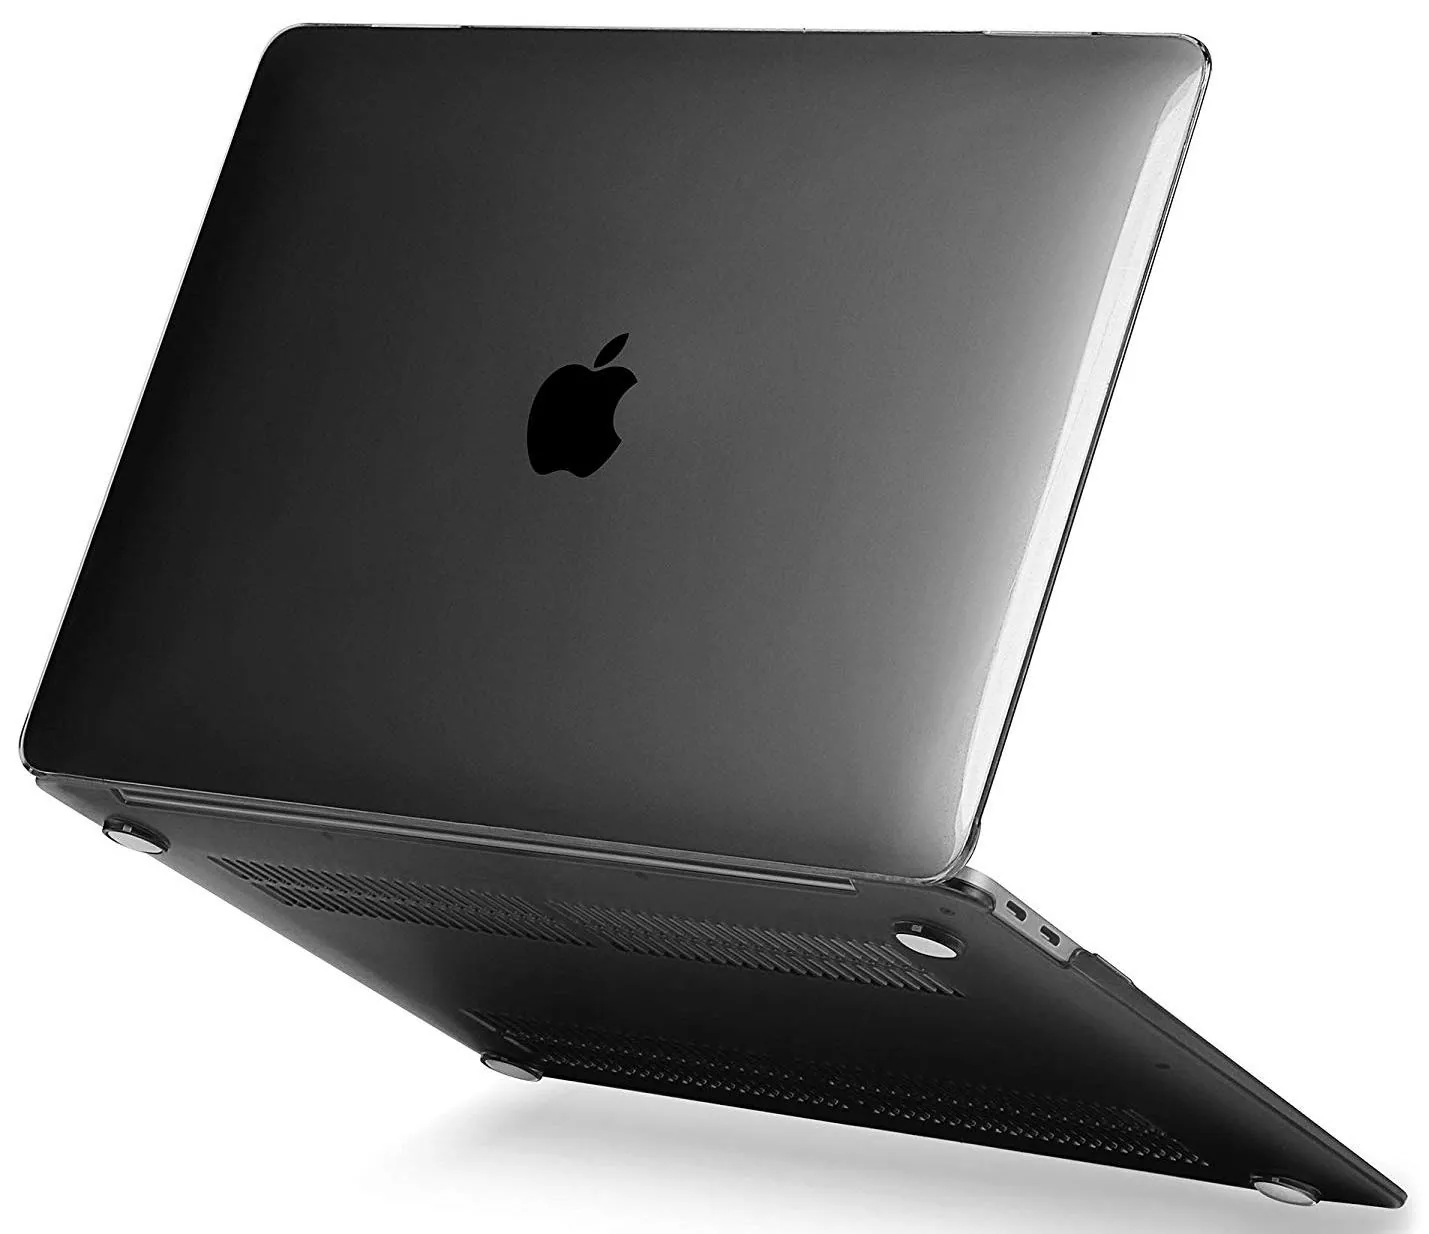  Some Facts And Features About The MacBook 12in M7